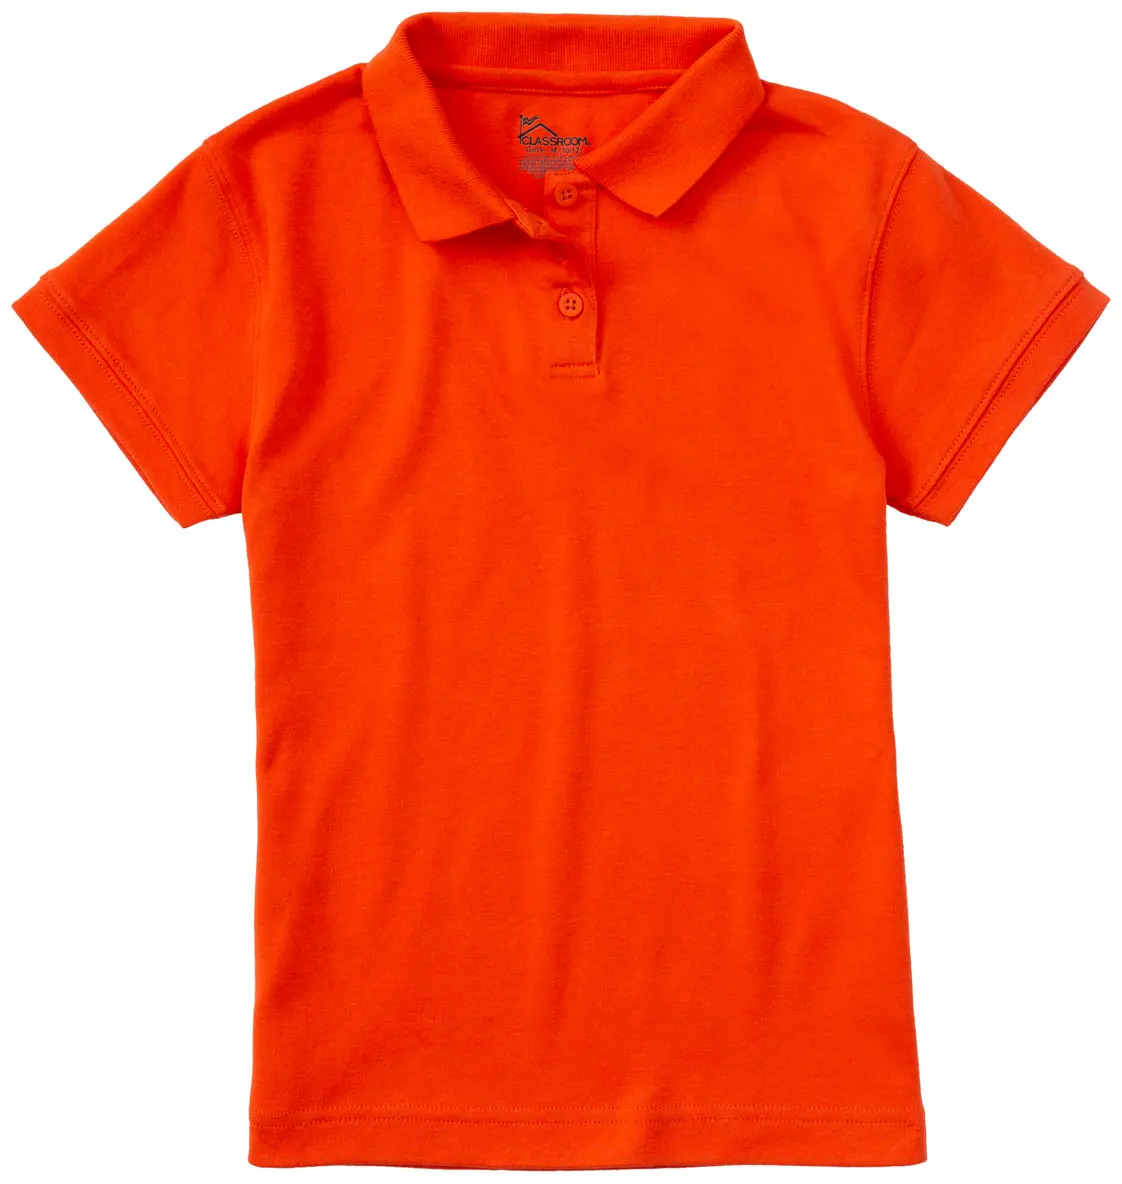 Jrs Short Sleeve Fitted Interlock Polo